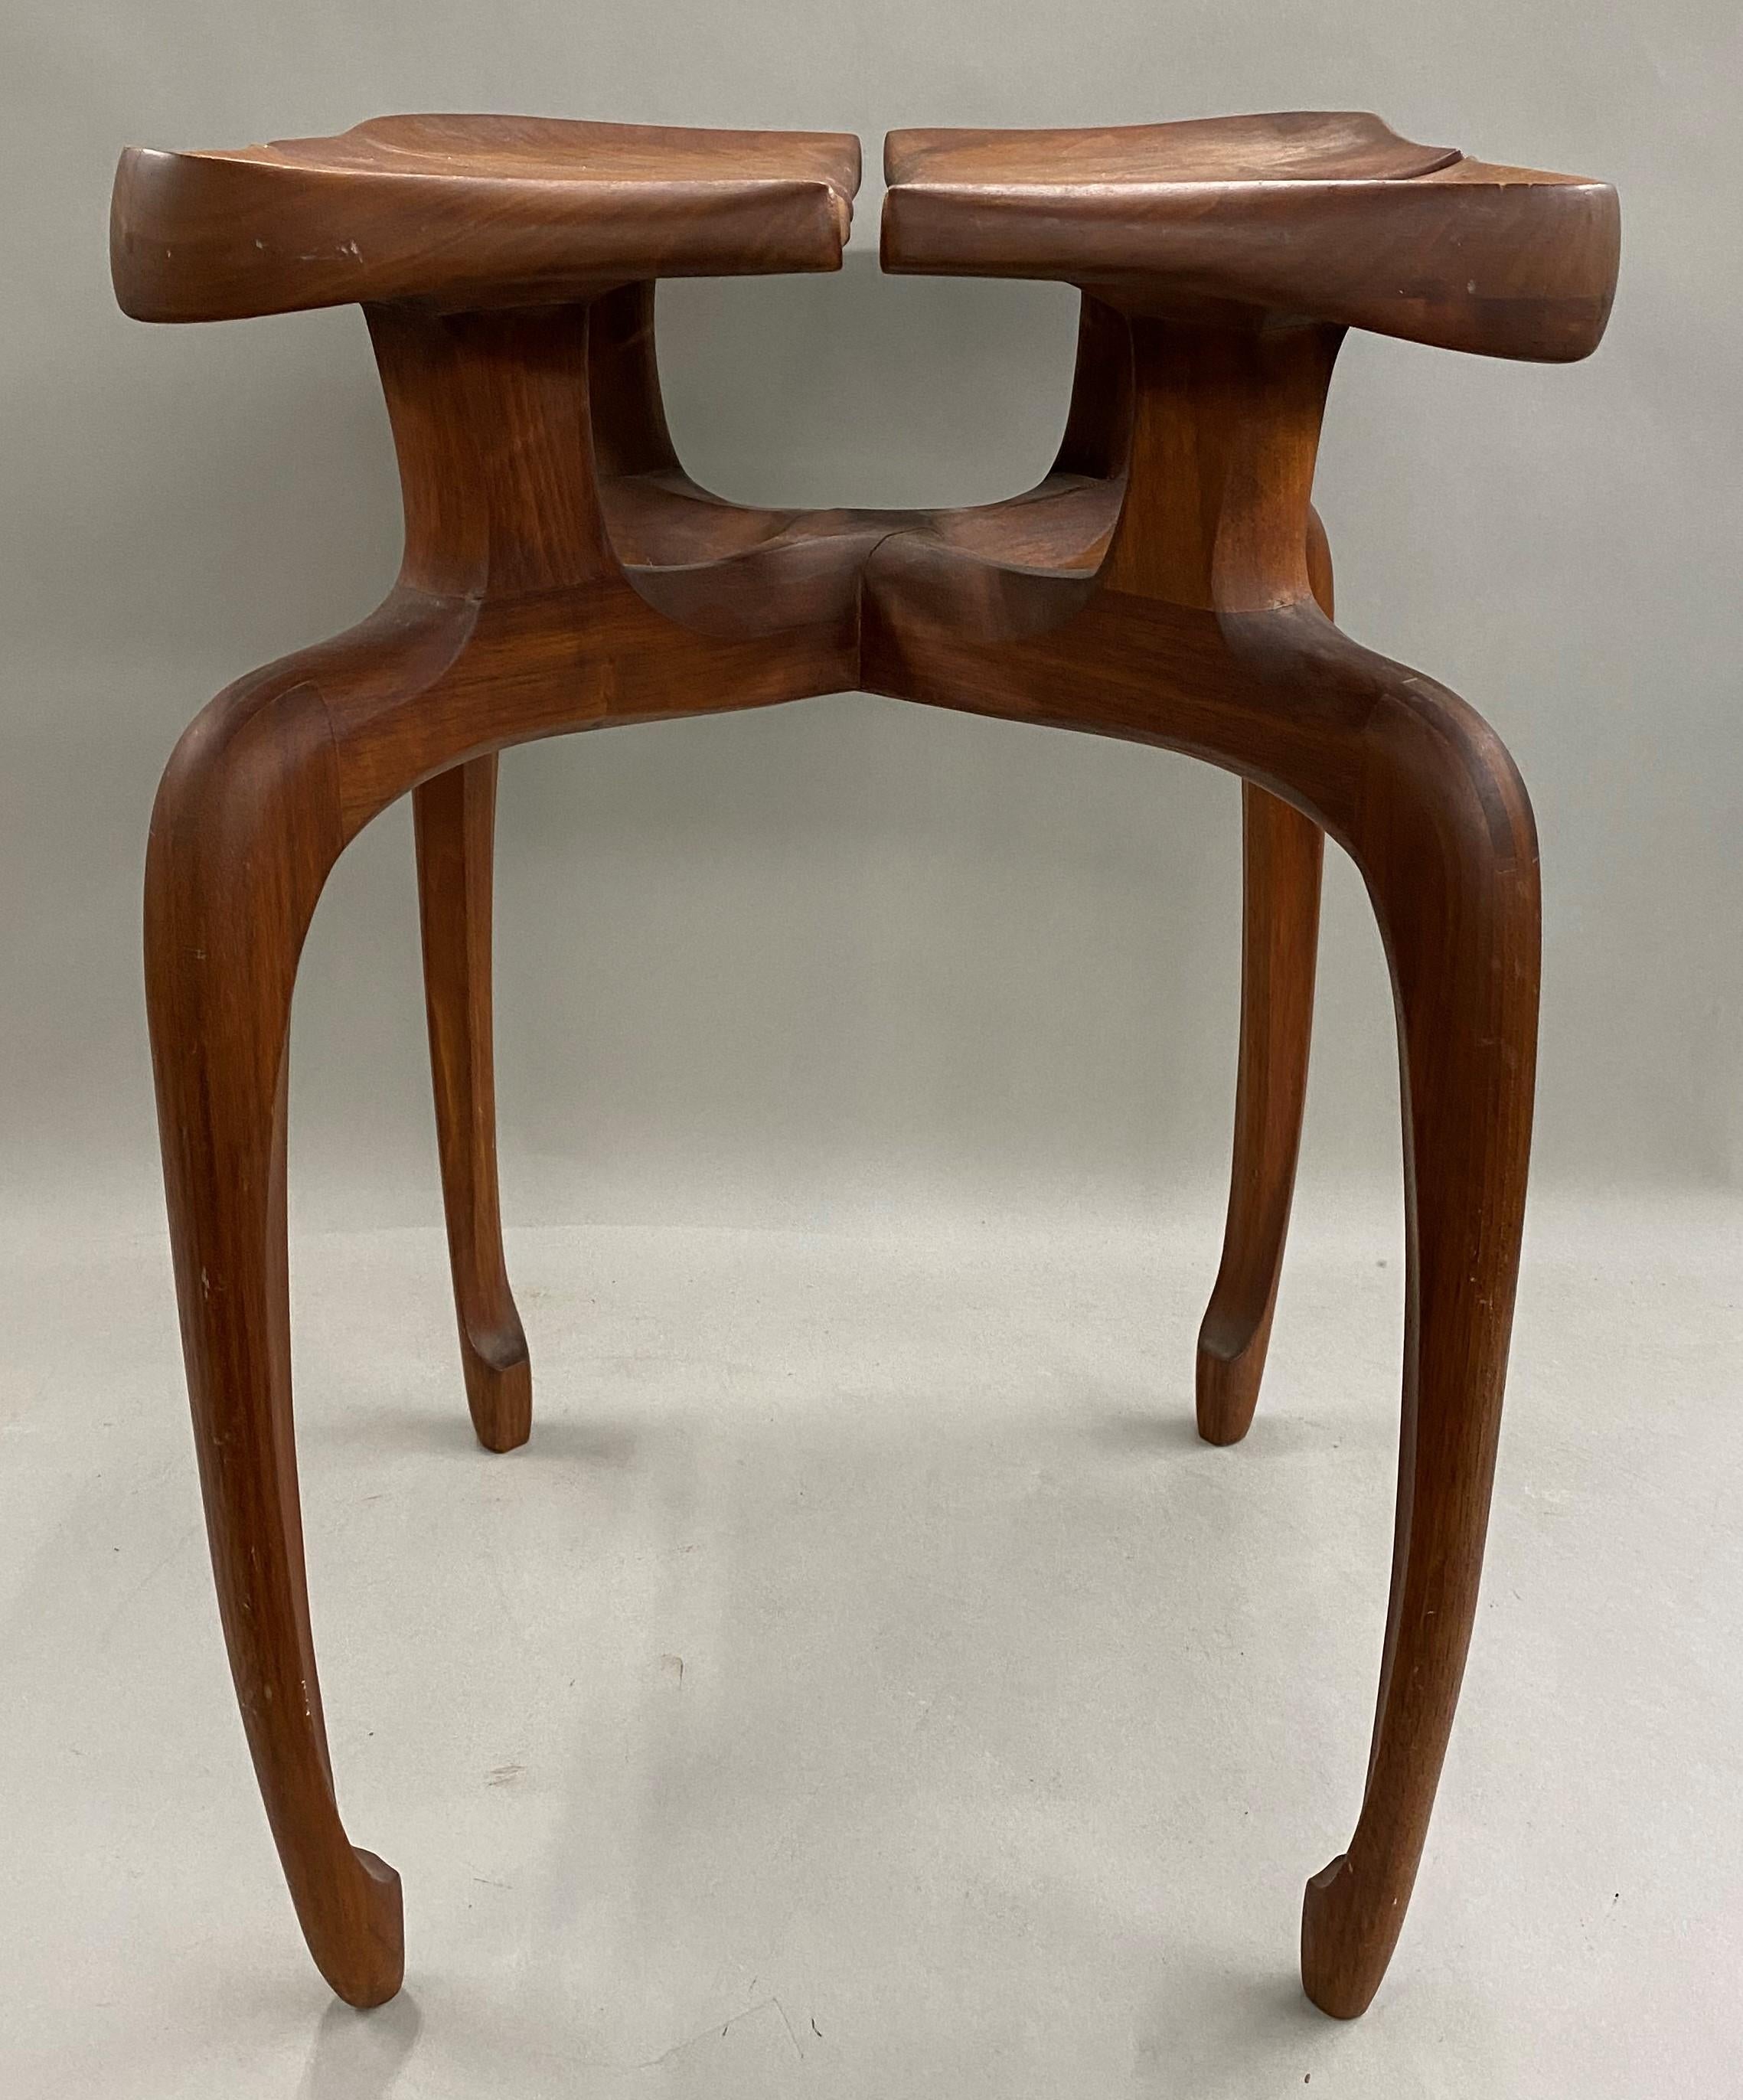 Hand-Carved Hand Carved Modernist Low Table with Four Petals circa 1972